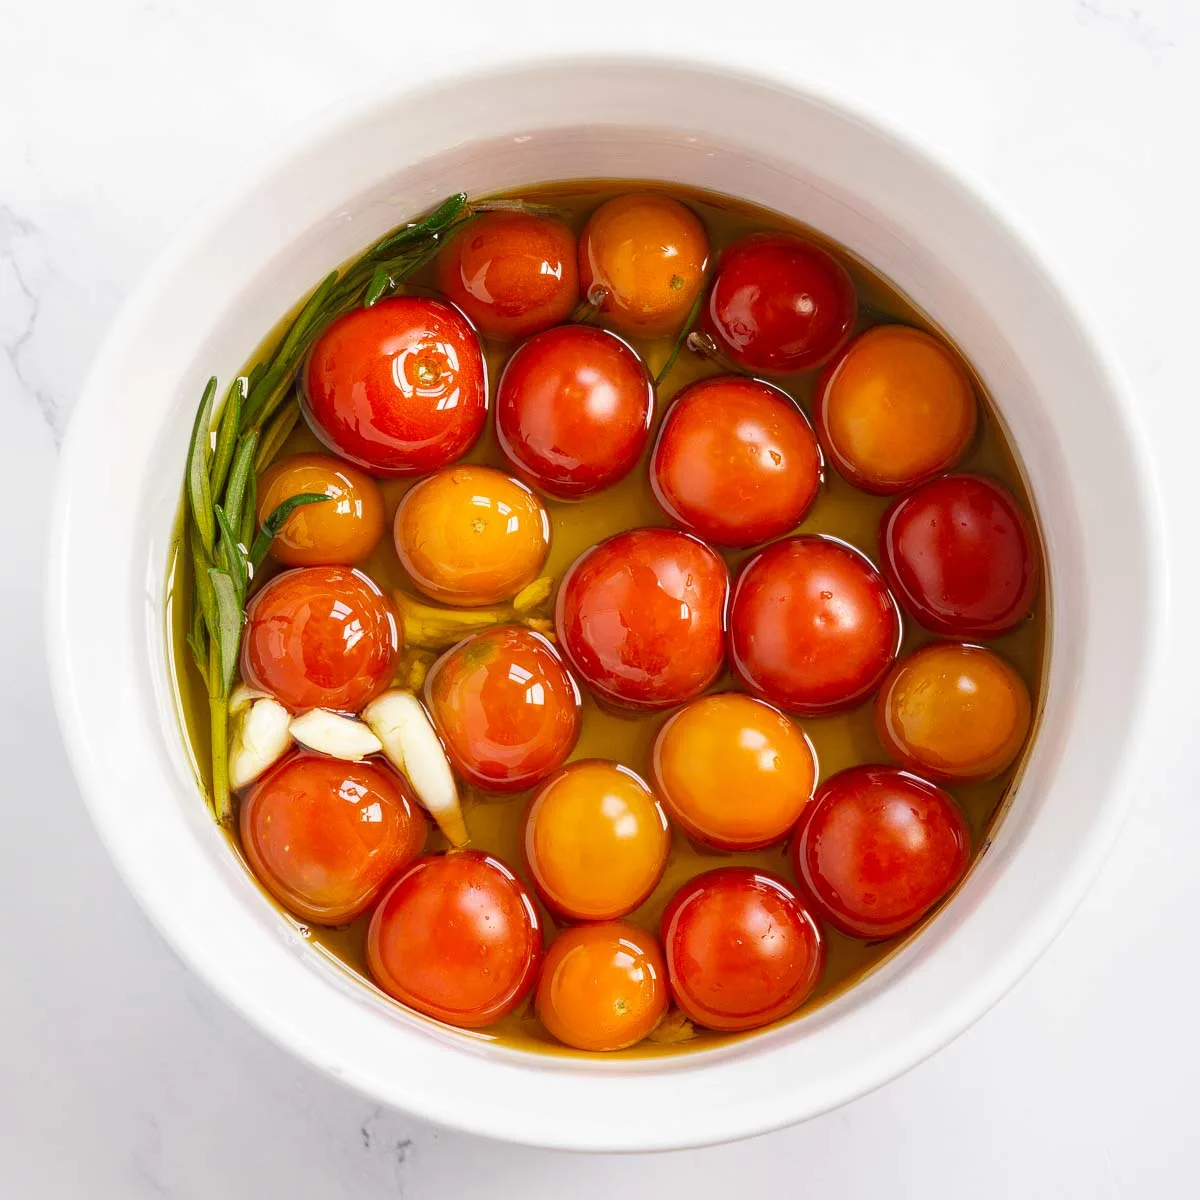 Cherry tomatoes, olive oil, crushed garlic, and fresh rosemary in a baking dish.